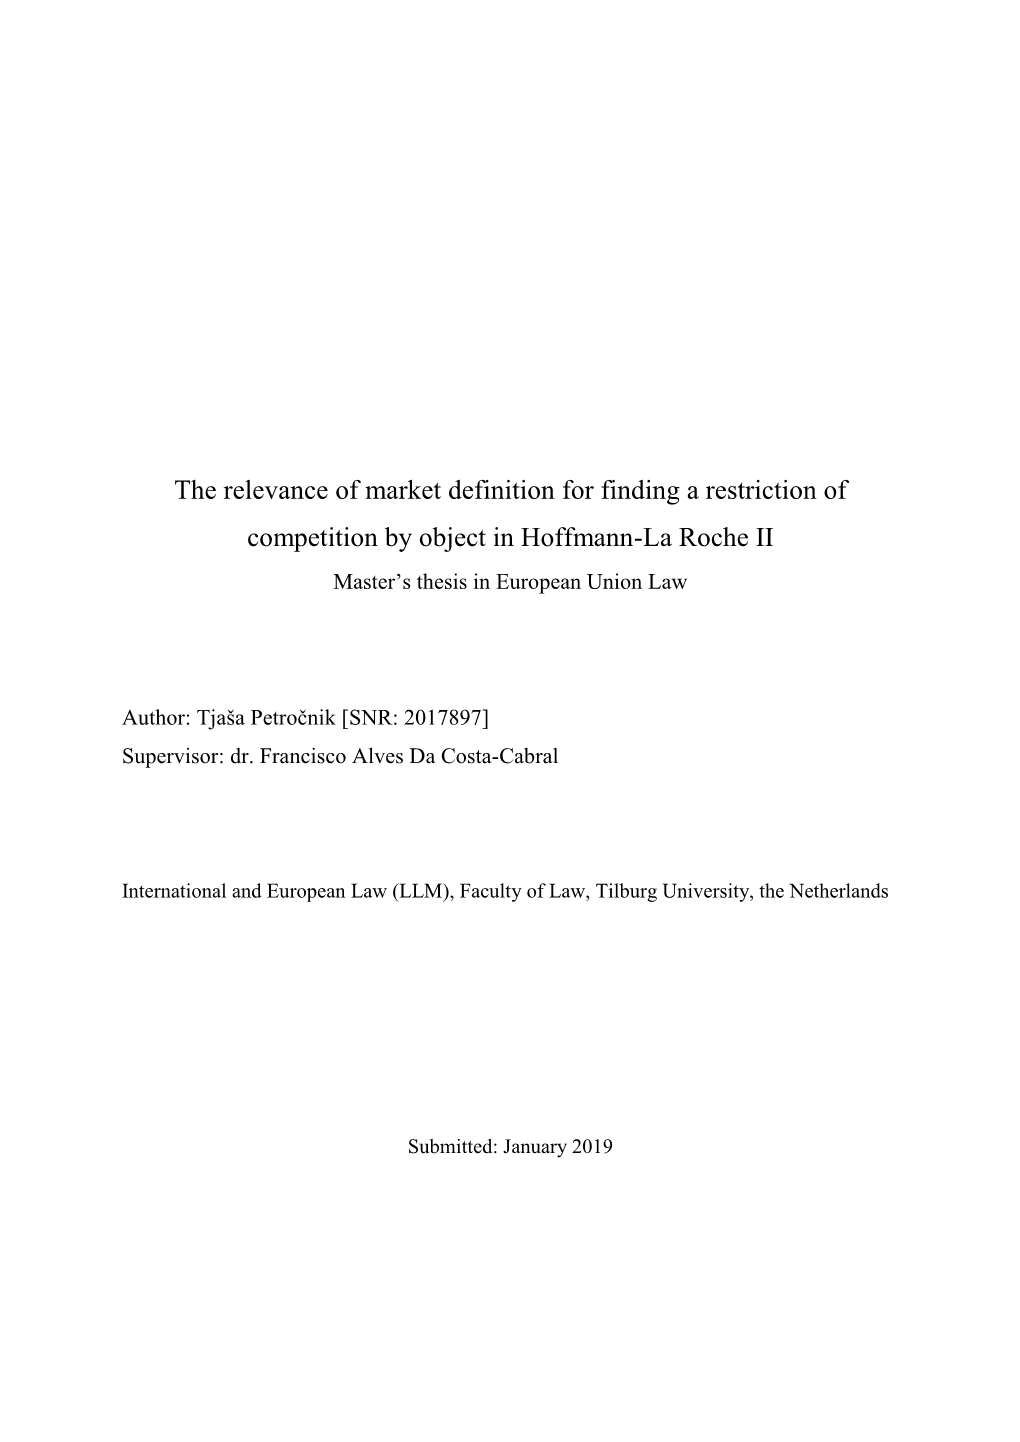 The Relevance of Market Definition for Finding a Restriction of Competition by Object in Hoffmann-La Roche II Master’S Thesis in European Union Law